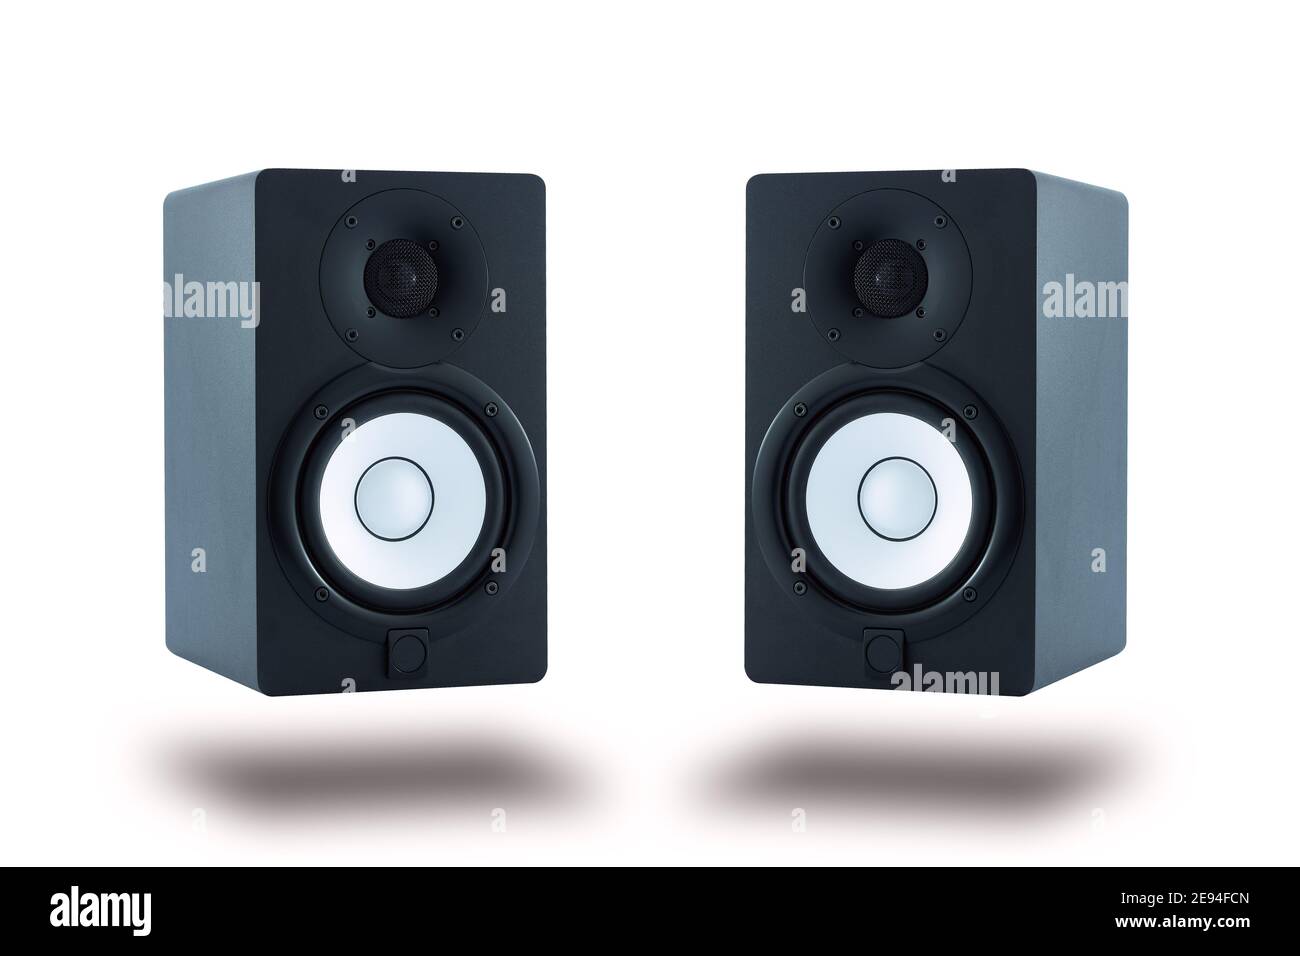 Pair of professional high quality monitor speakers for sound recording, mixing, and mastering in studio in black wooden casing isolated. Stock Photo